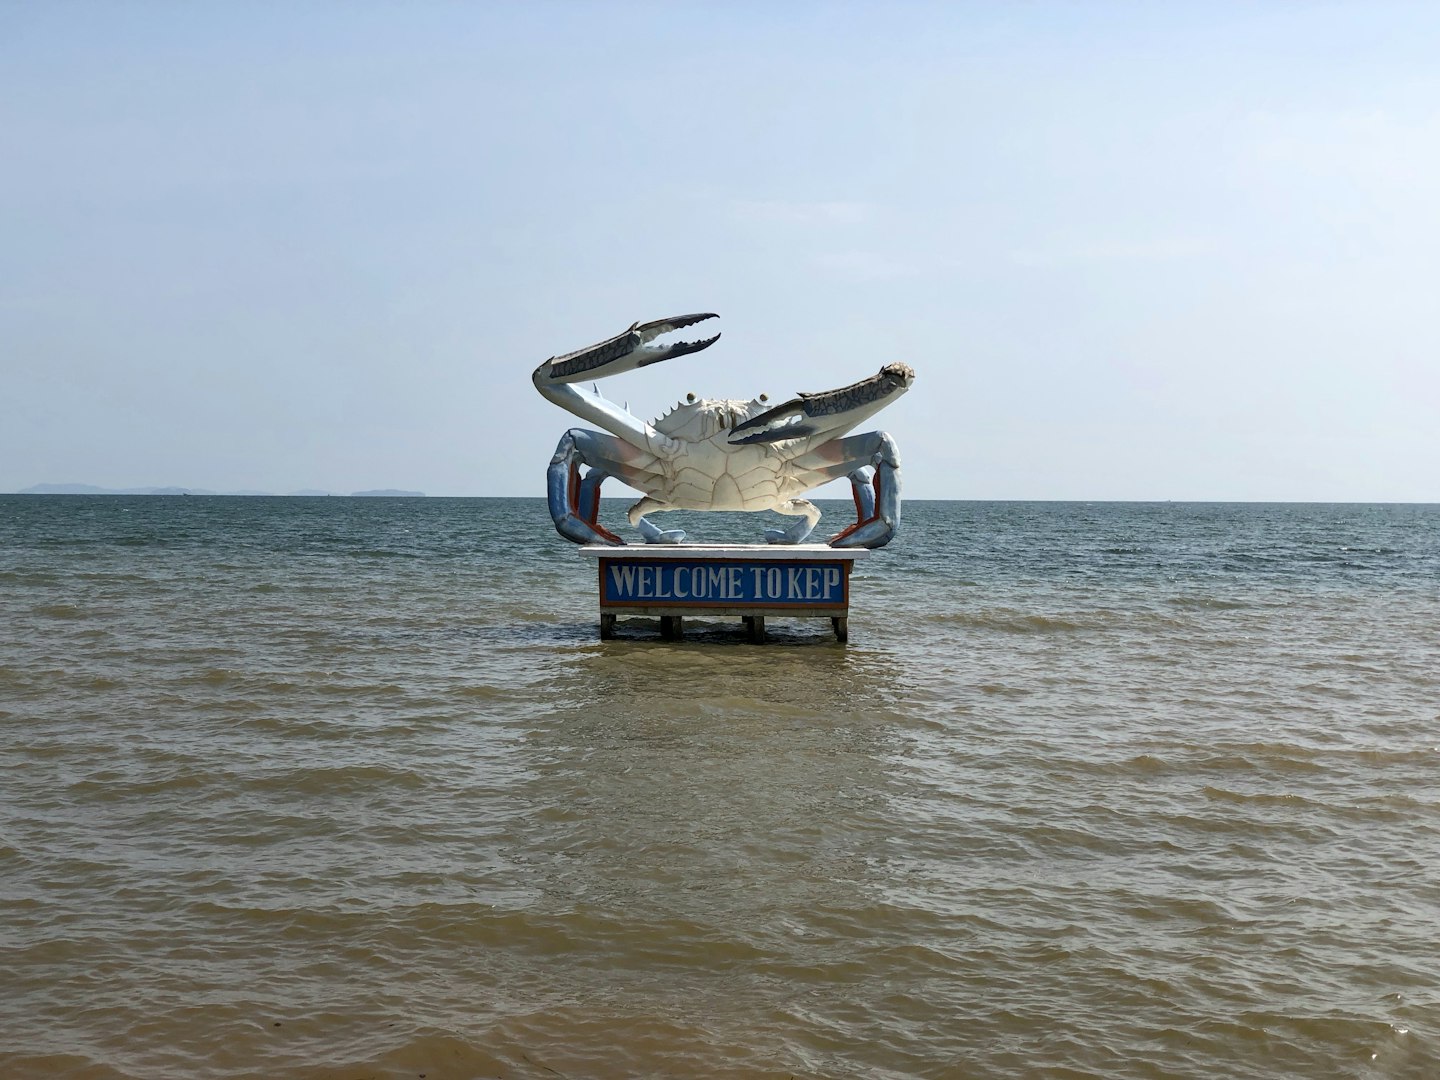 the crab statue at the beach in Kep, Cambodia